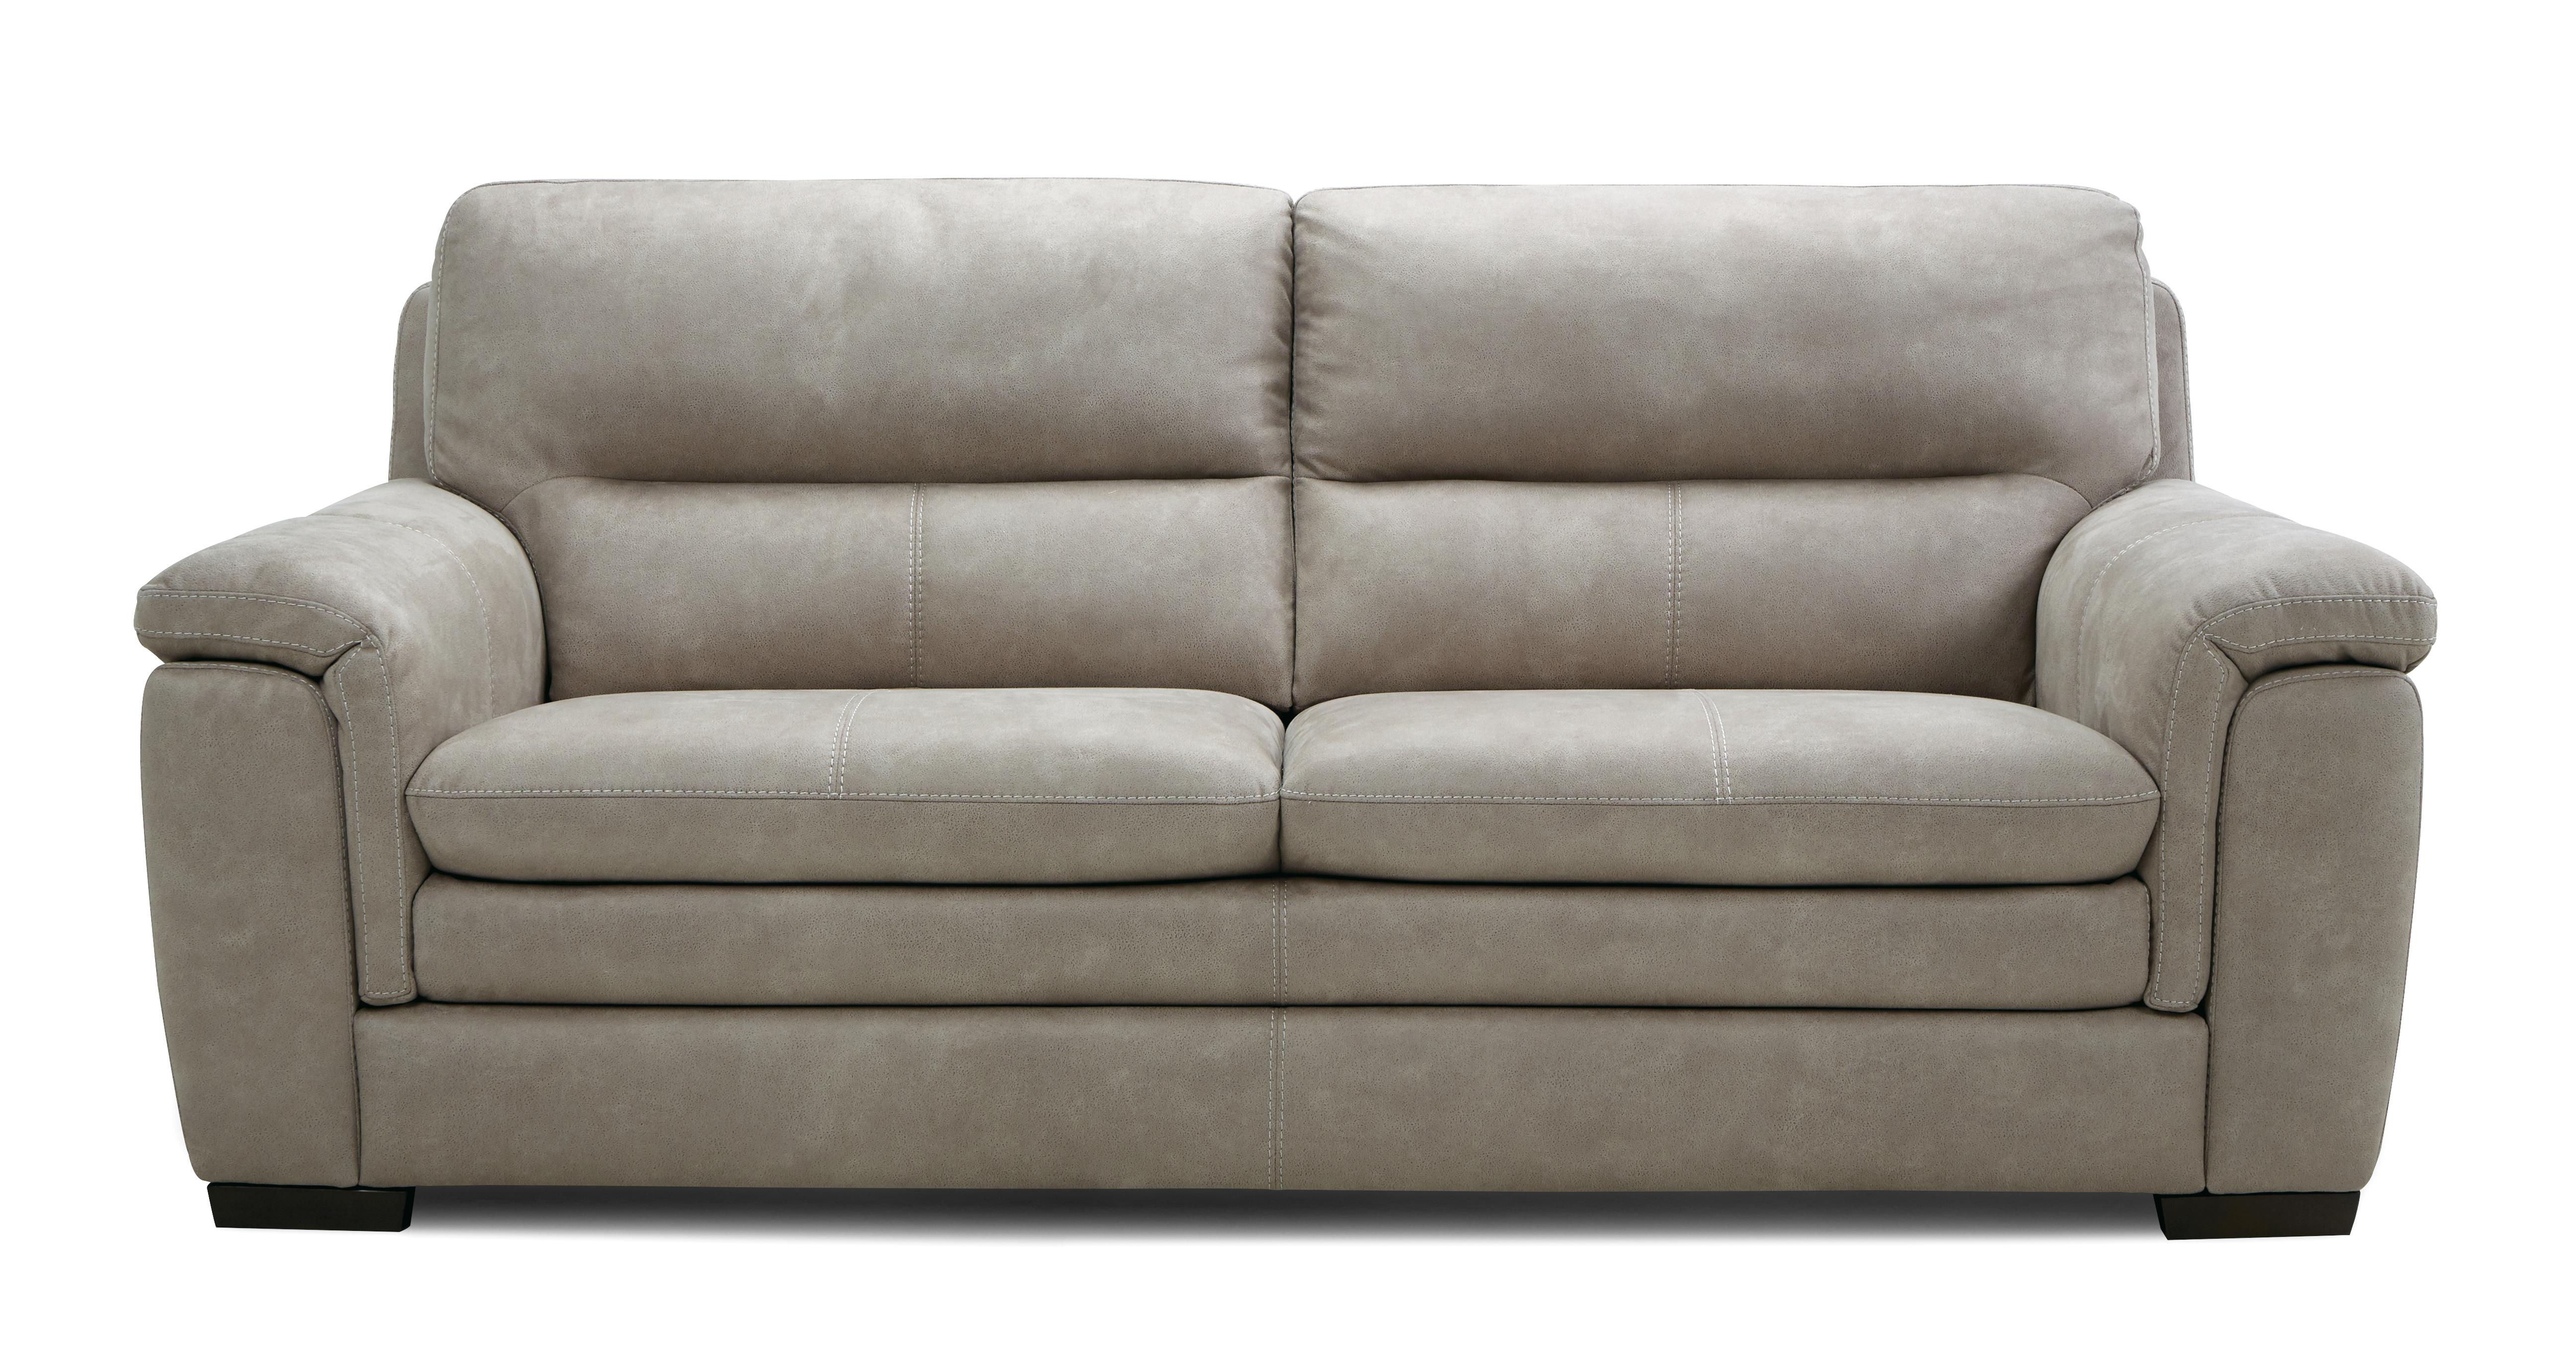 Elm Fabric 3 Seater Sofa Arizona Dfs, How Much Fabric For 3 Seater Sofa